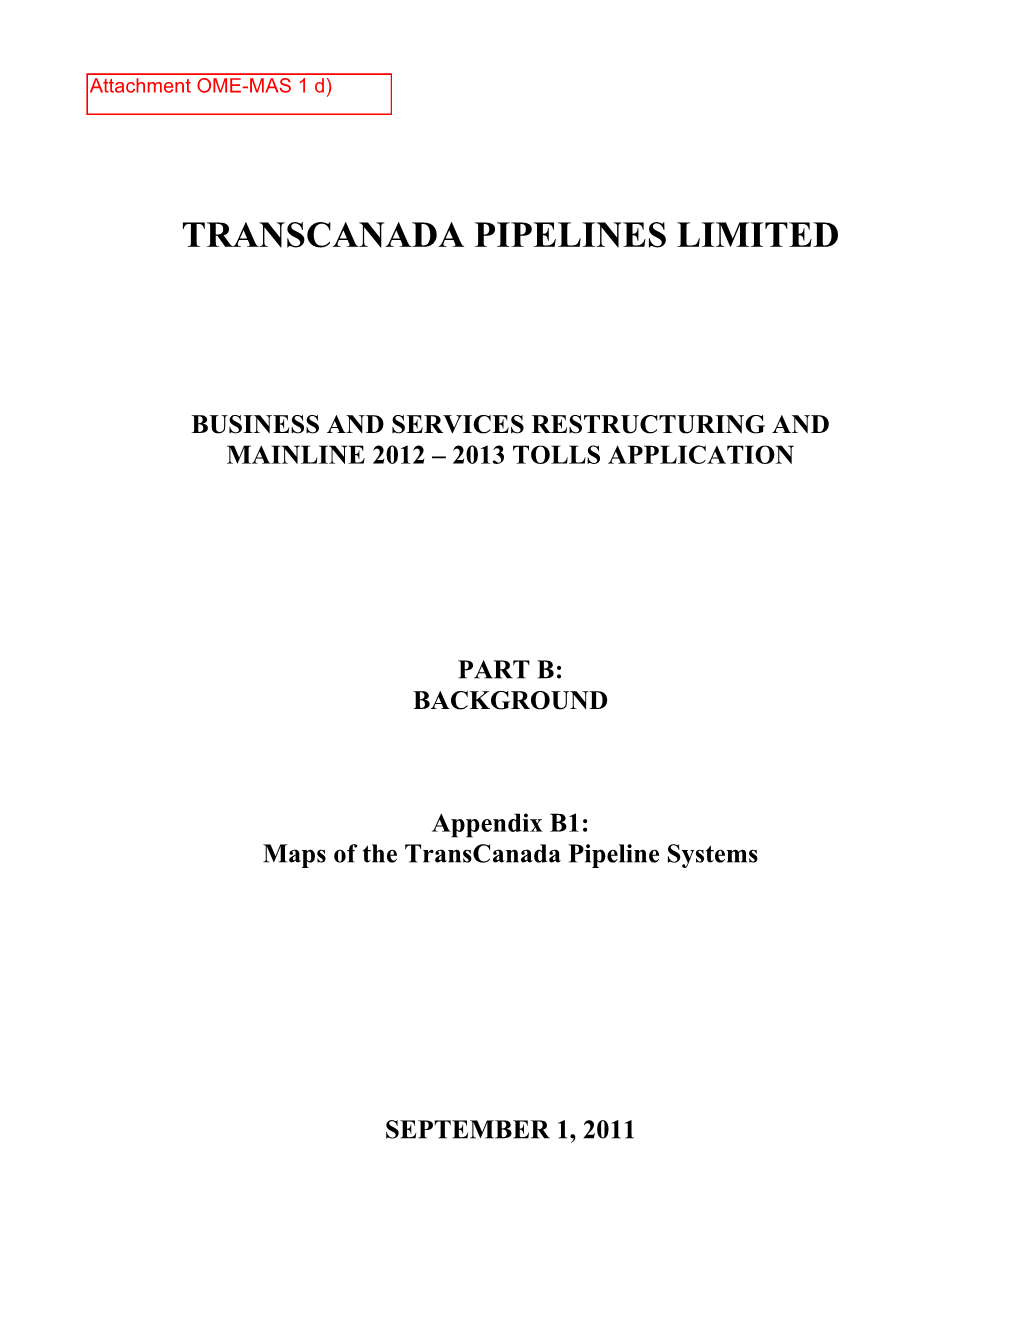 Transcanada Pipelines Limited